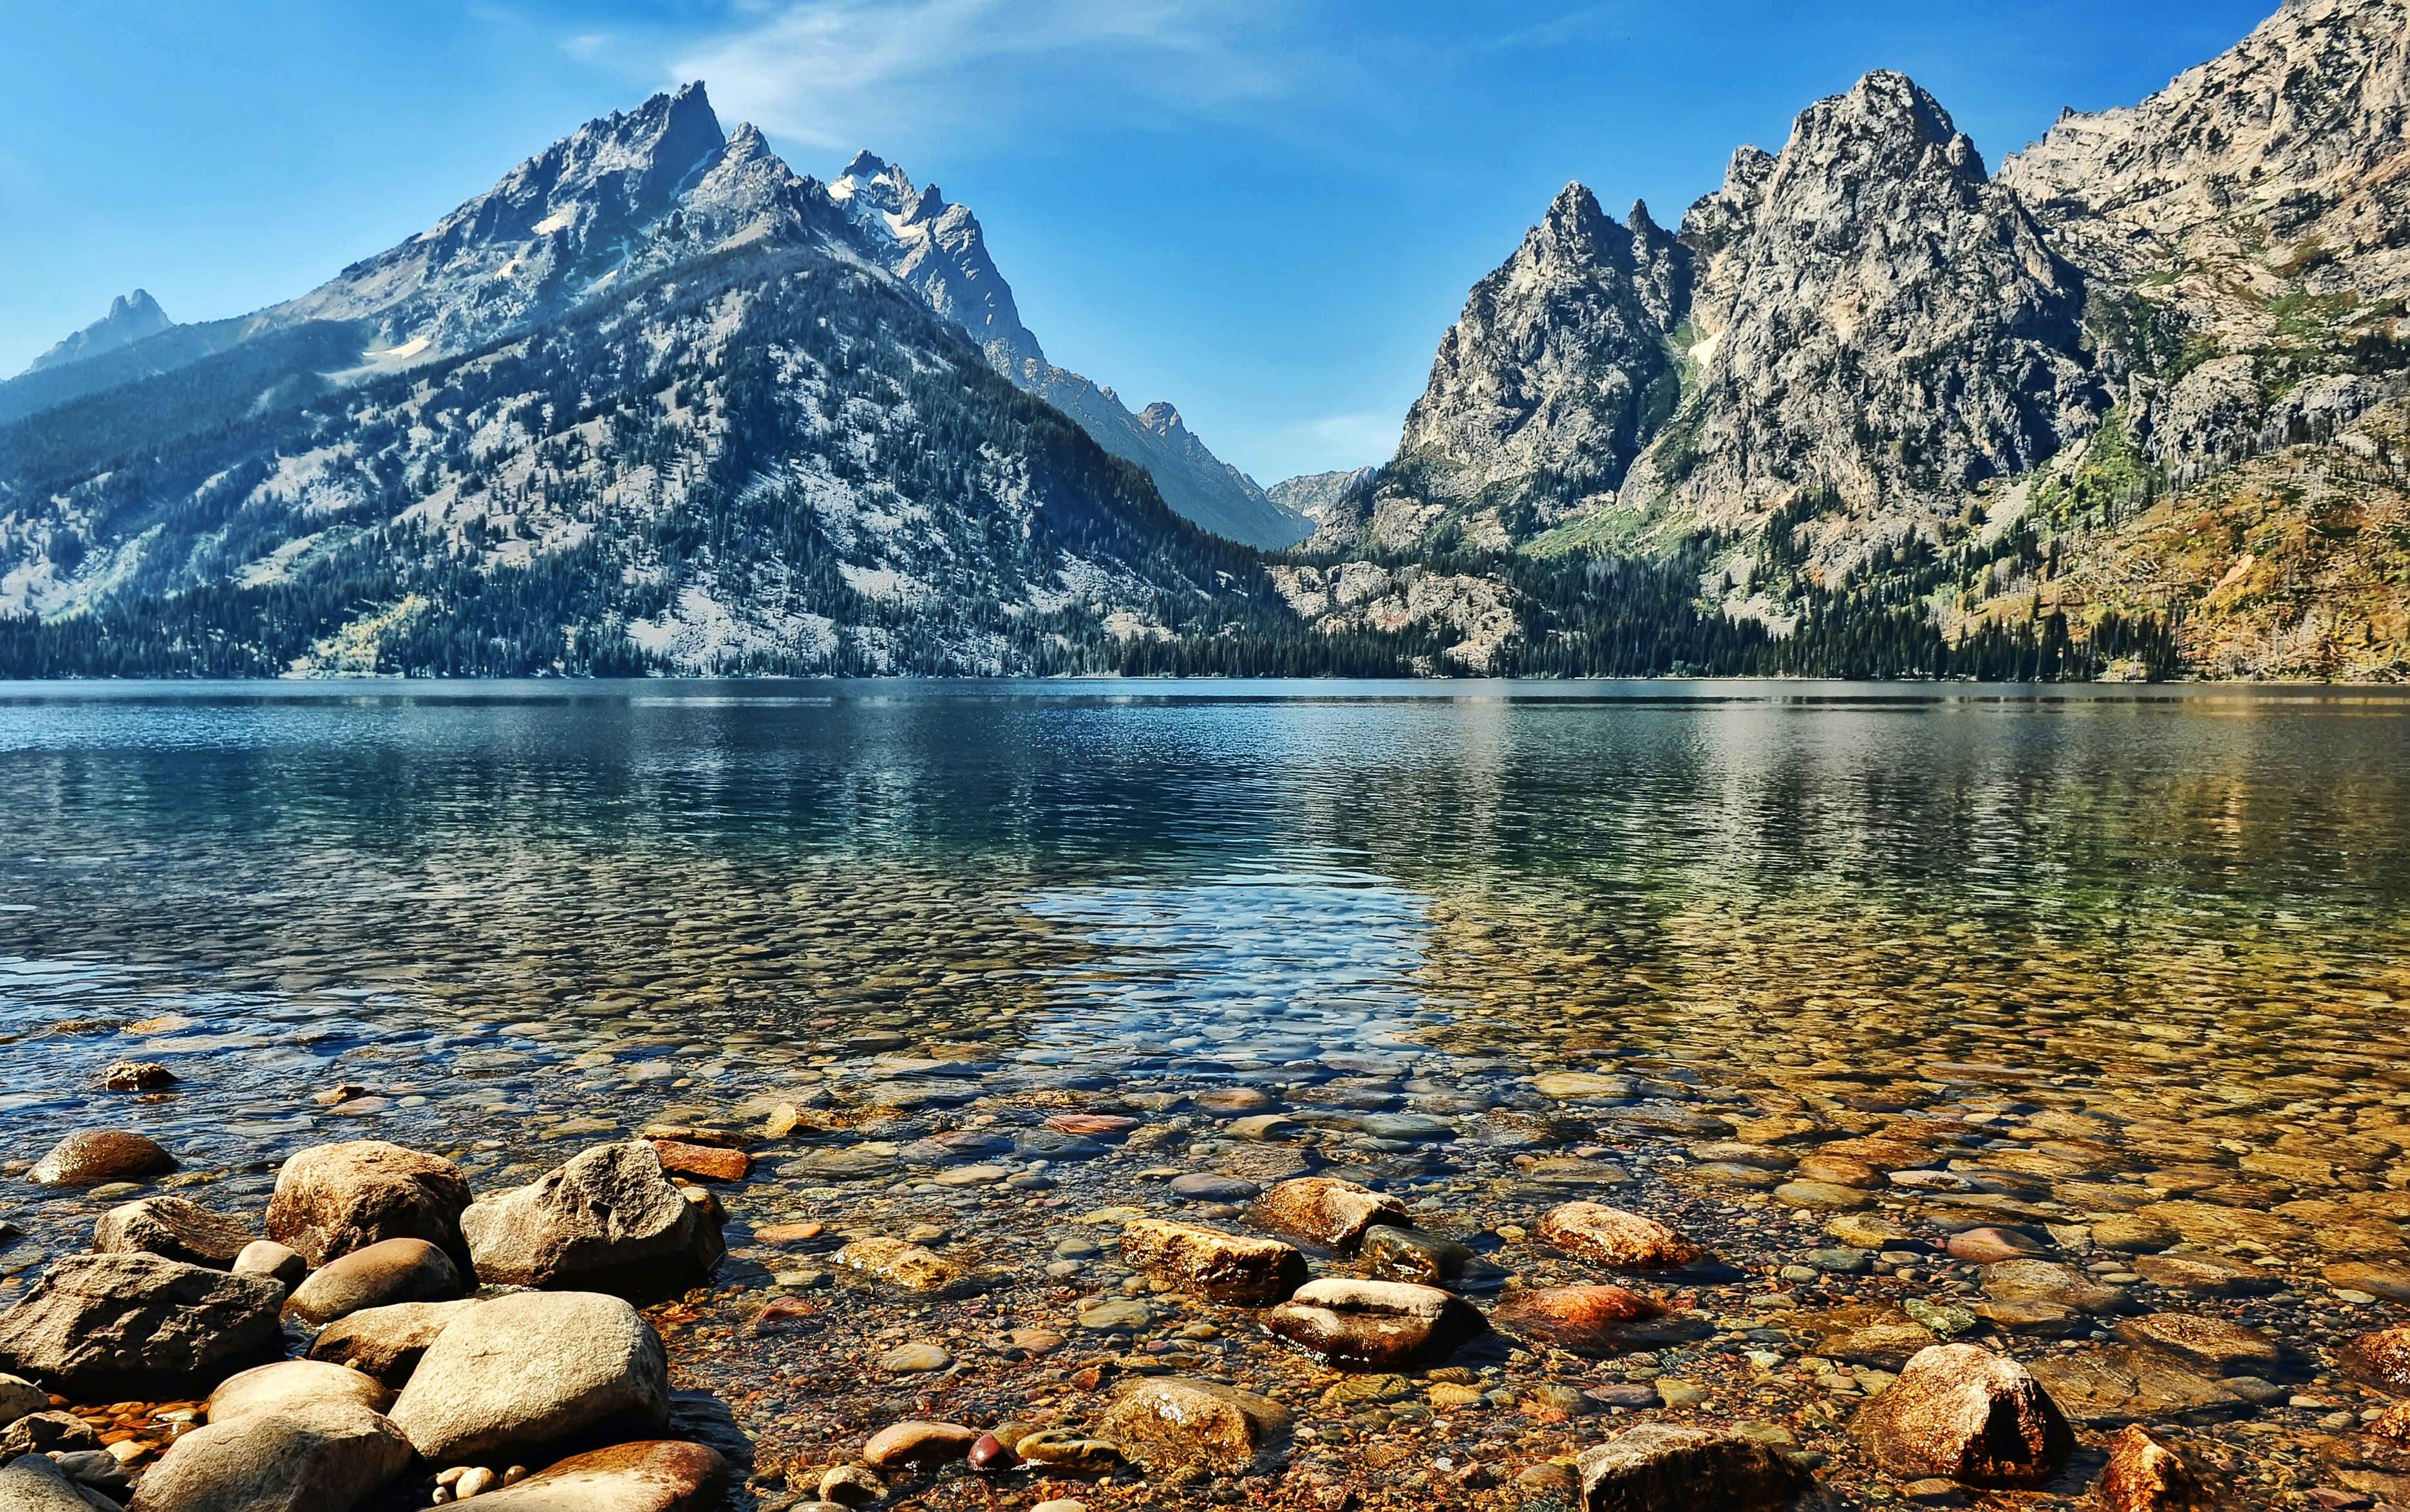 The ragged peaks of Grand Teton National Park rise steeply over Jenny Lake. The massif on the left is deep blue in the shadows and where trees cover its flanks, while the bright sunshine hi-lights its light grey rocky face. On the right, another peak is more brightly lit, appearing a light tan color with thin streaks of bright green vegetation. The lake itself is smooth and calm, a mixture of blues and greens, while in the extreme foreground the large, flat, stones on the shoreline are rust colored and grey